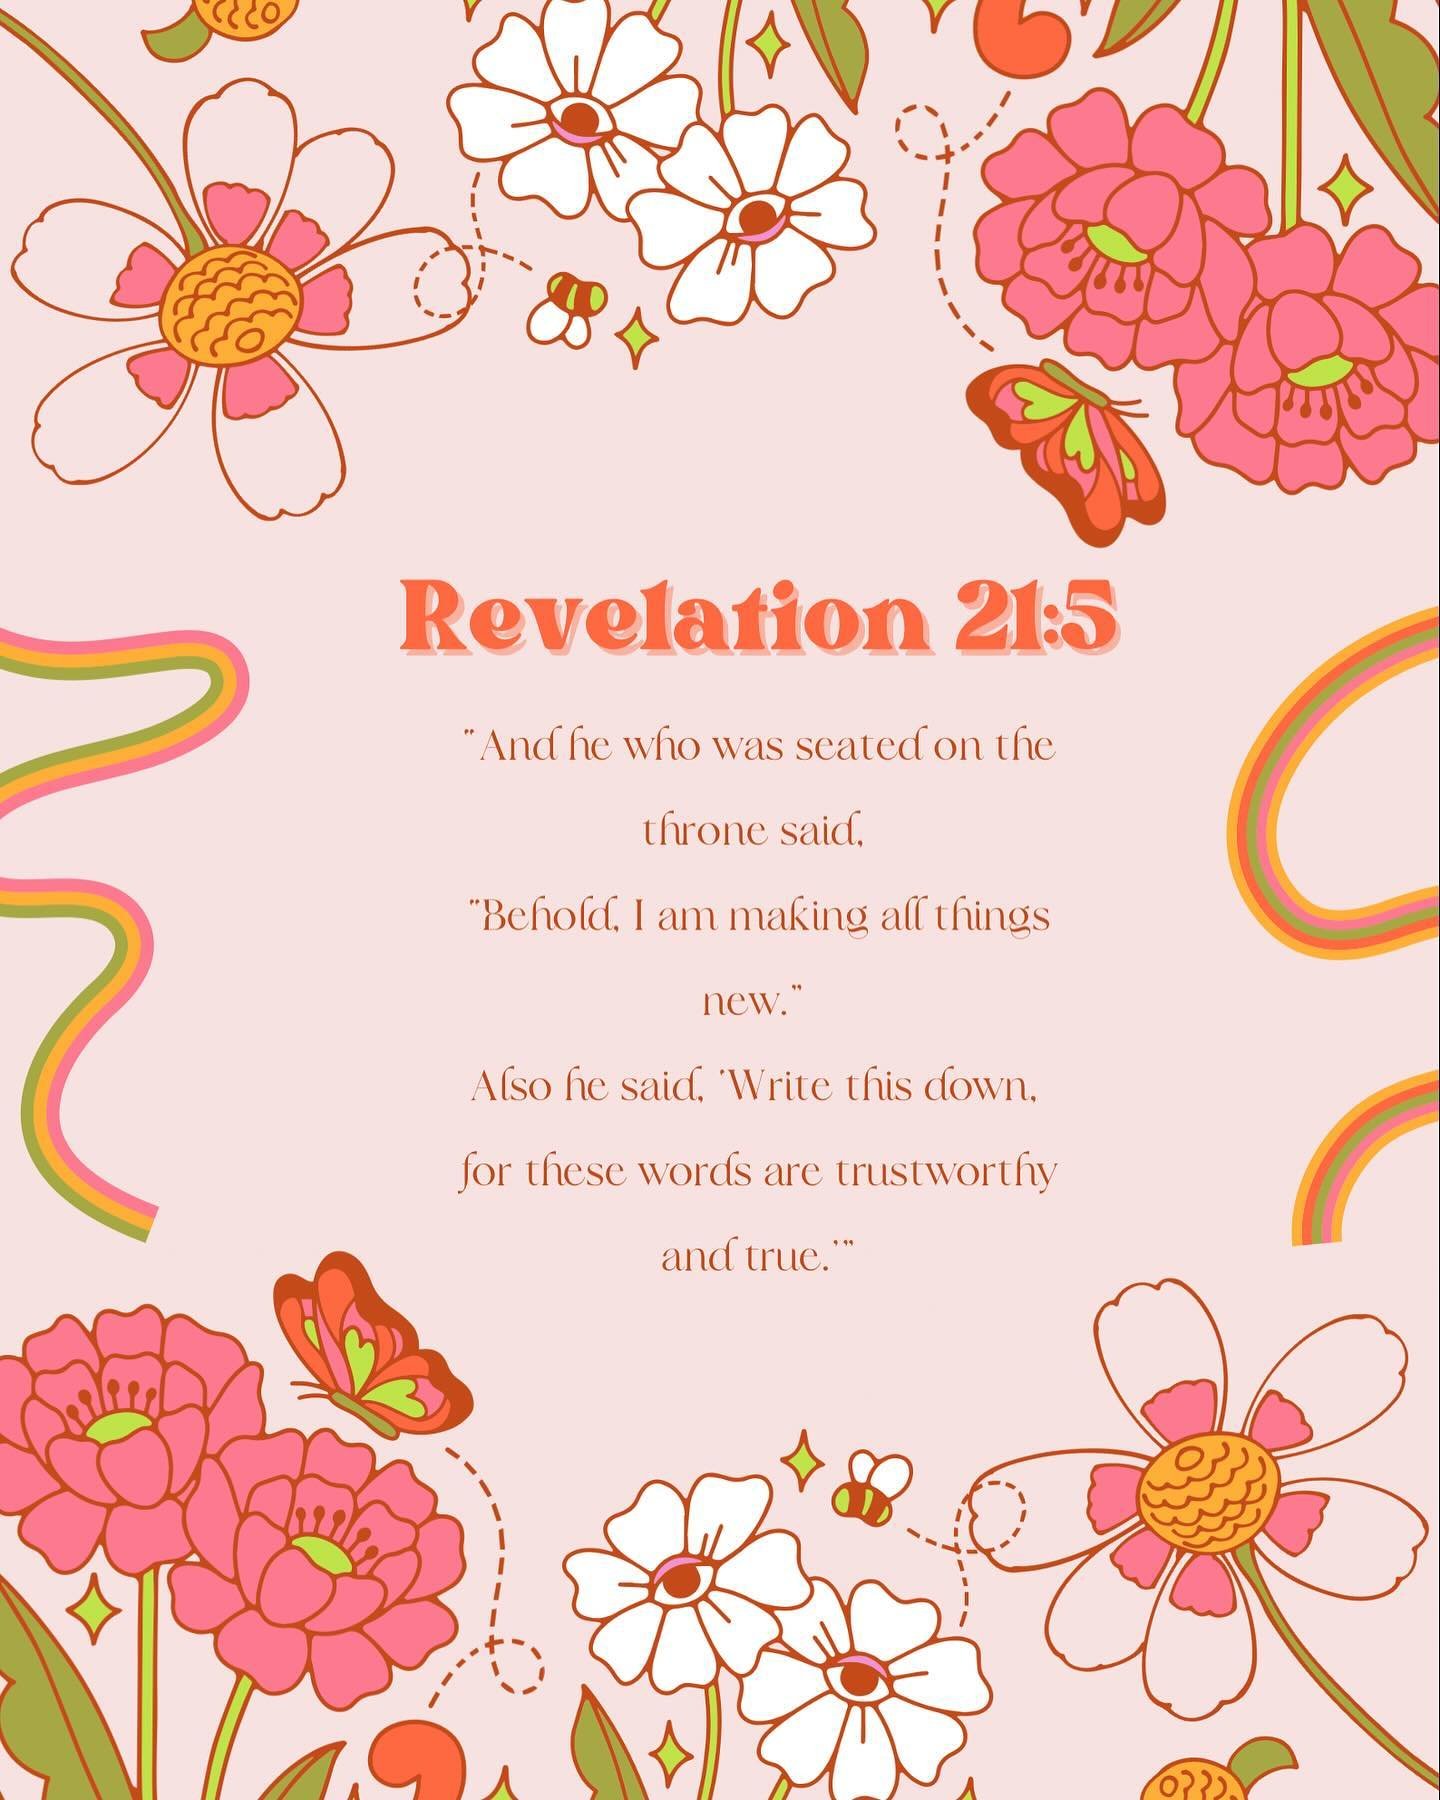 &ldquo;And he who was seated on the throne said, &ldquo;Behold, I am making all things new.&rdquo; Also he said, &lsquo;Write this down, for these words are trustworthy and true.&rsquo;&rdquo;

Revelation 21:5

Do you trust that God keeps his promise